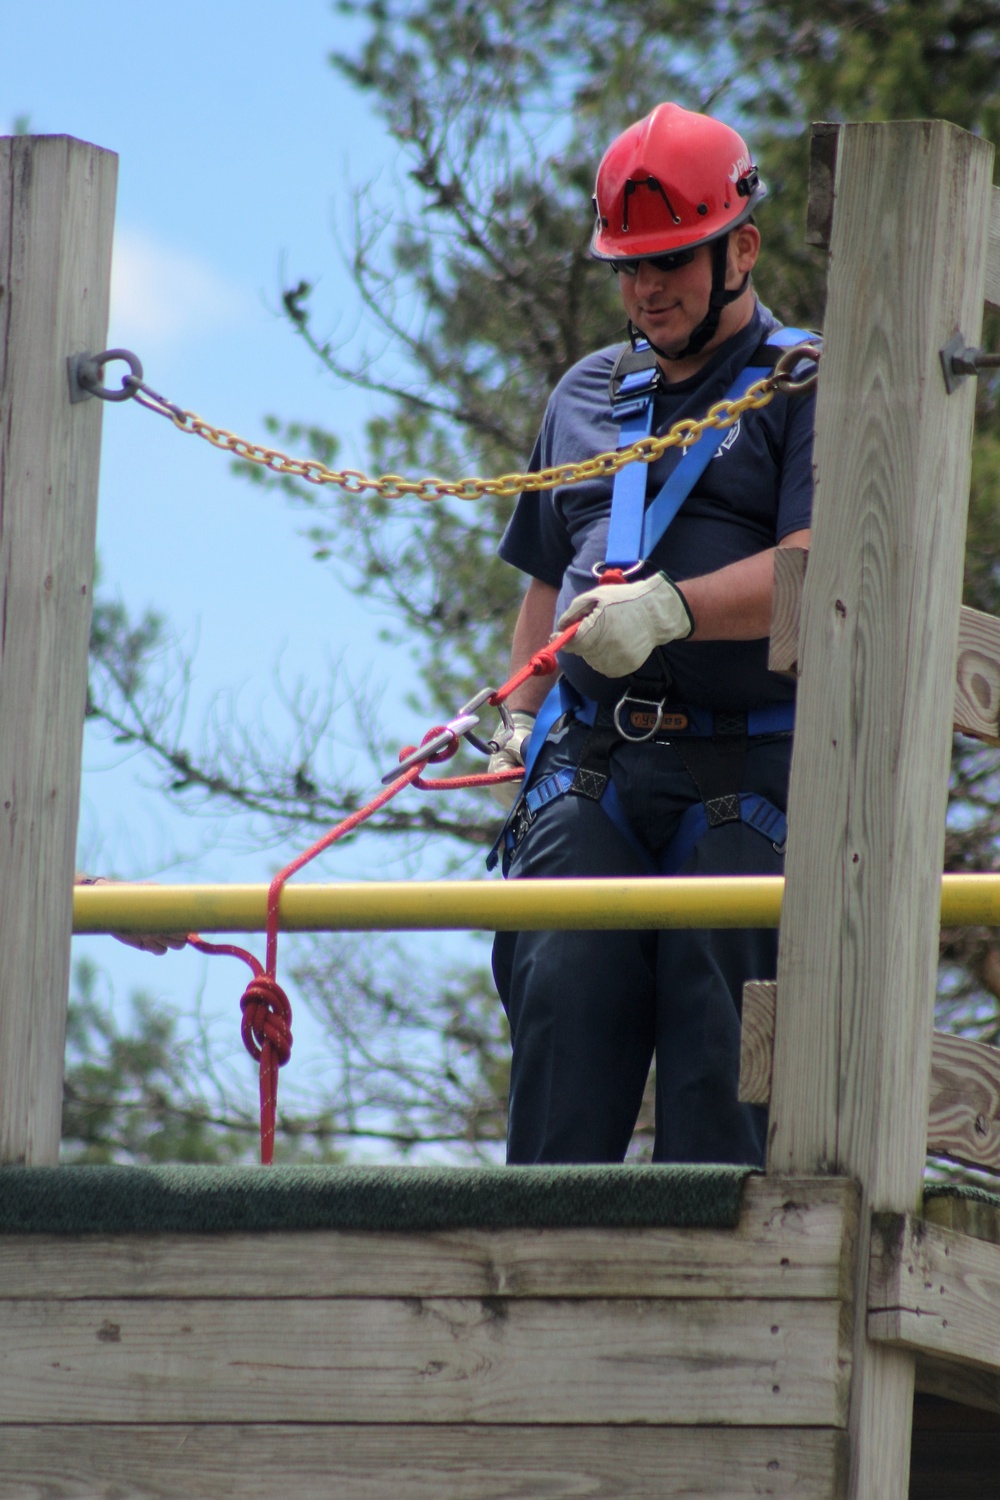 DVIDS - Images - Firefighters learn rope, rappelling skills during